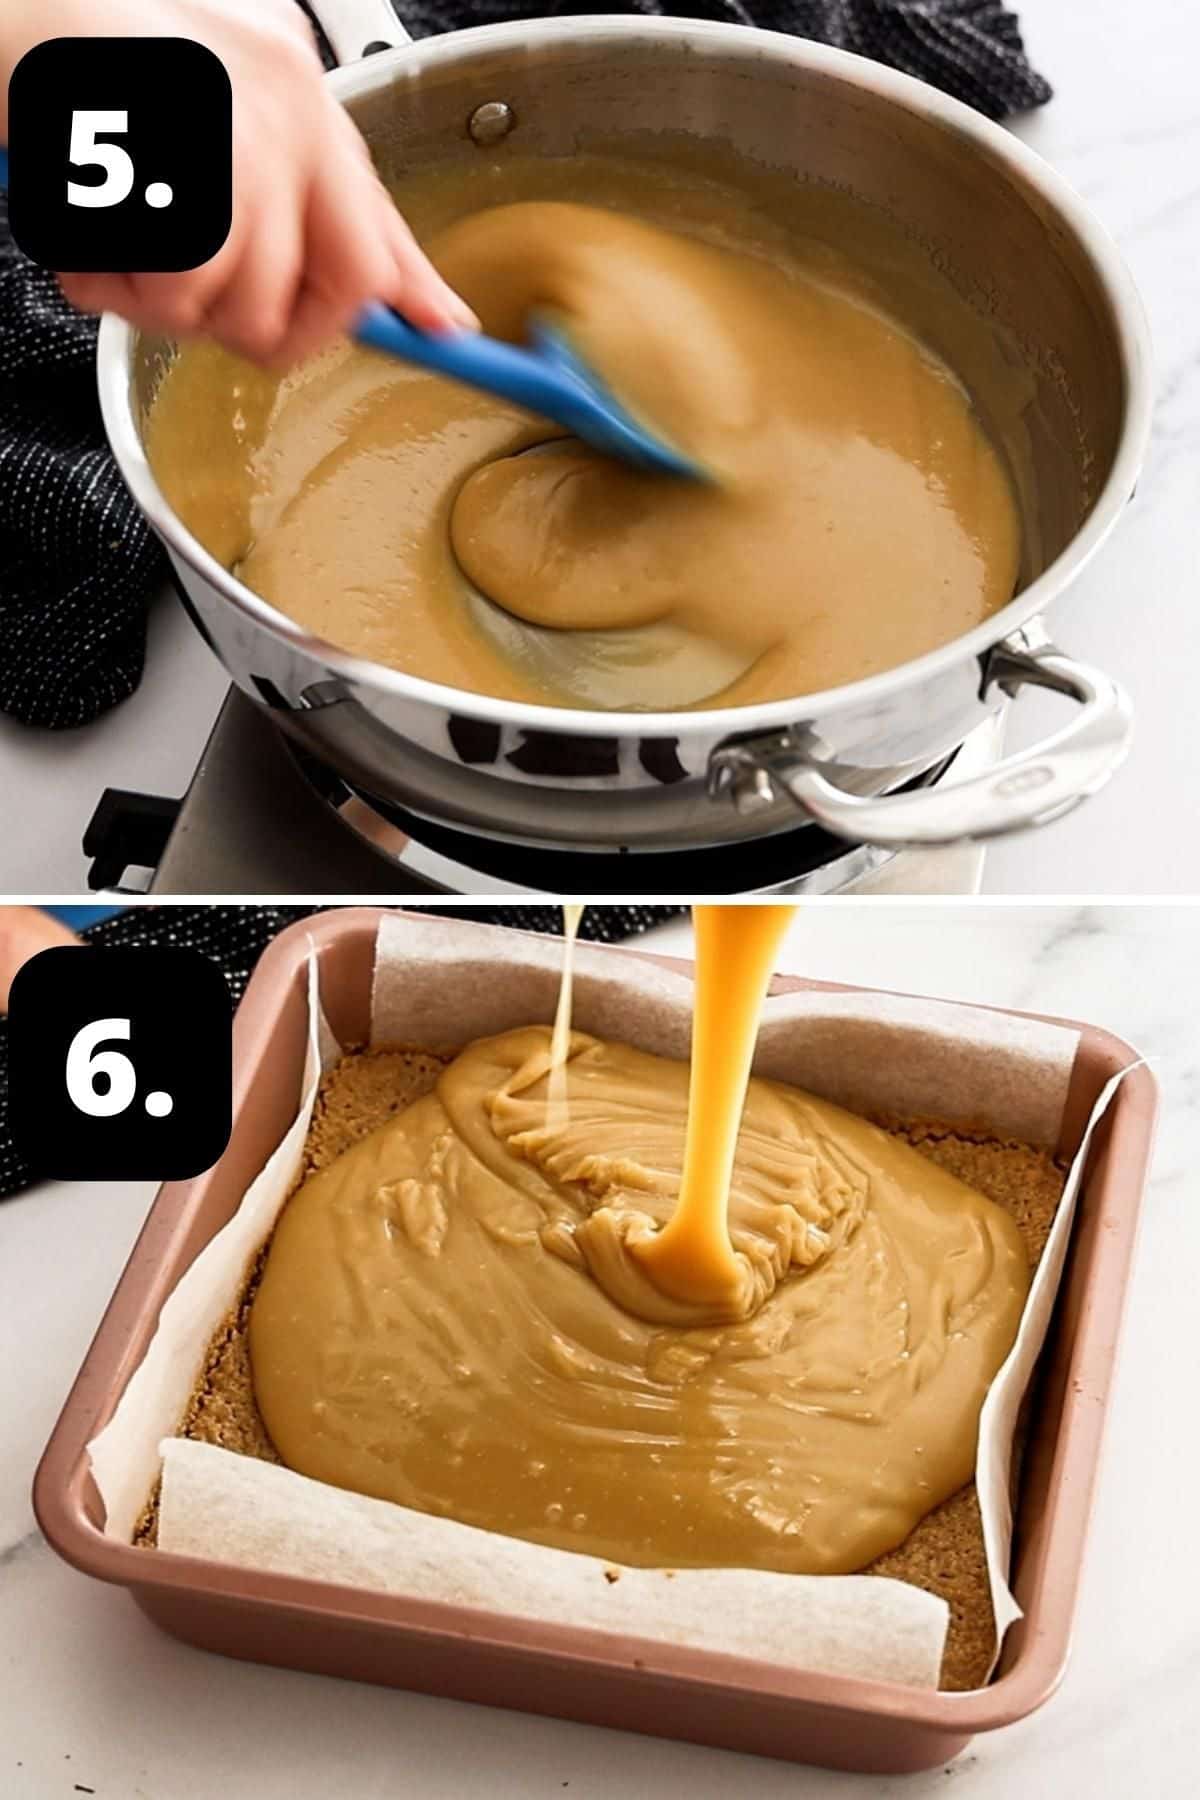 Steps 5-6 of preparing this recipe - the cooked caramel and pouring the caramel onto the base.